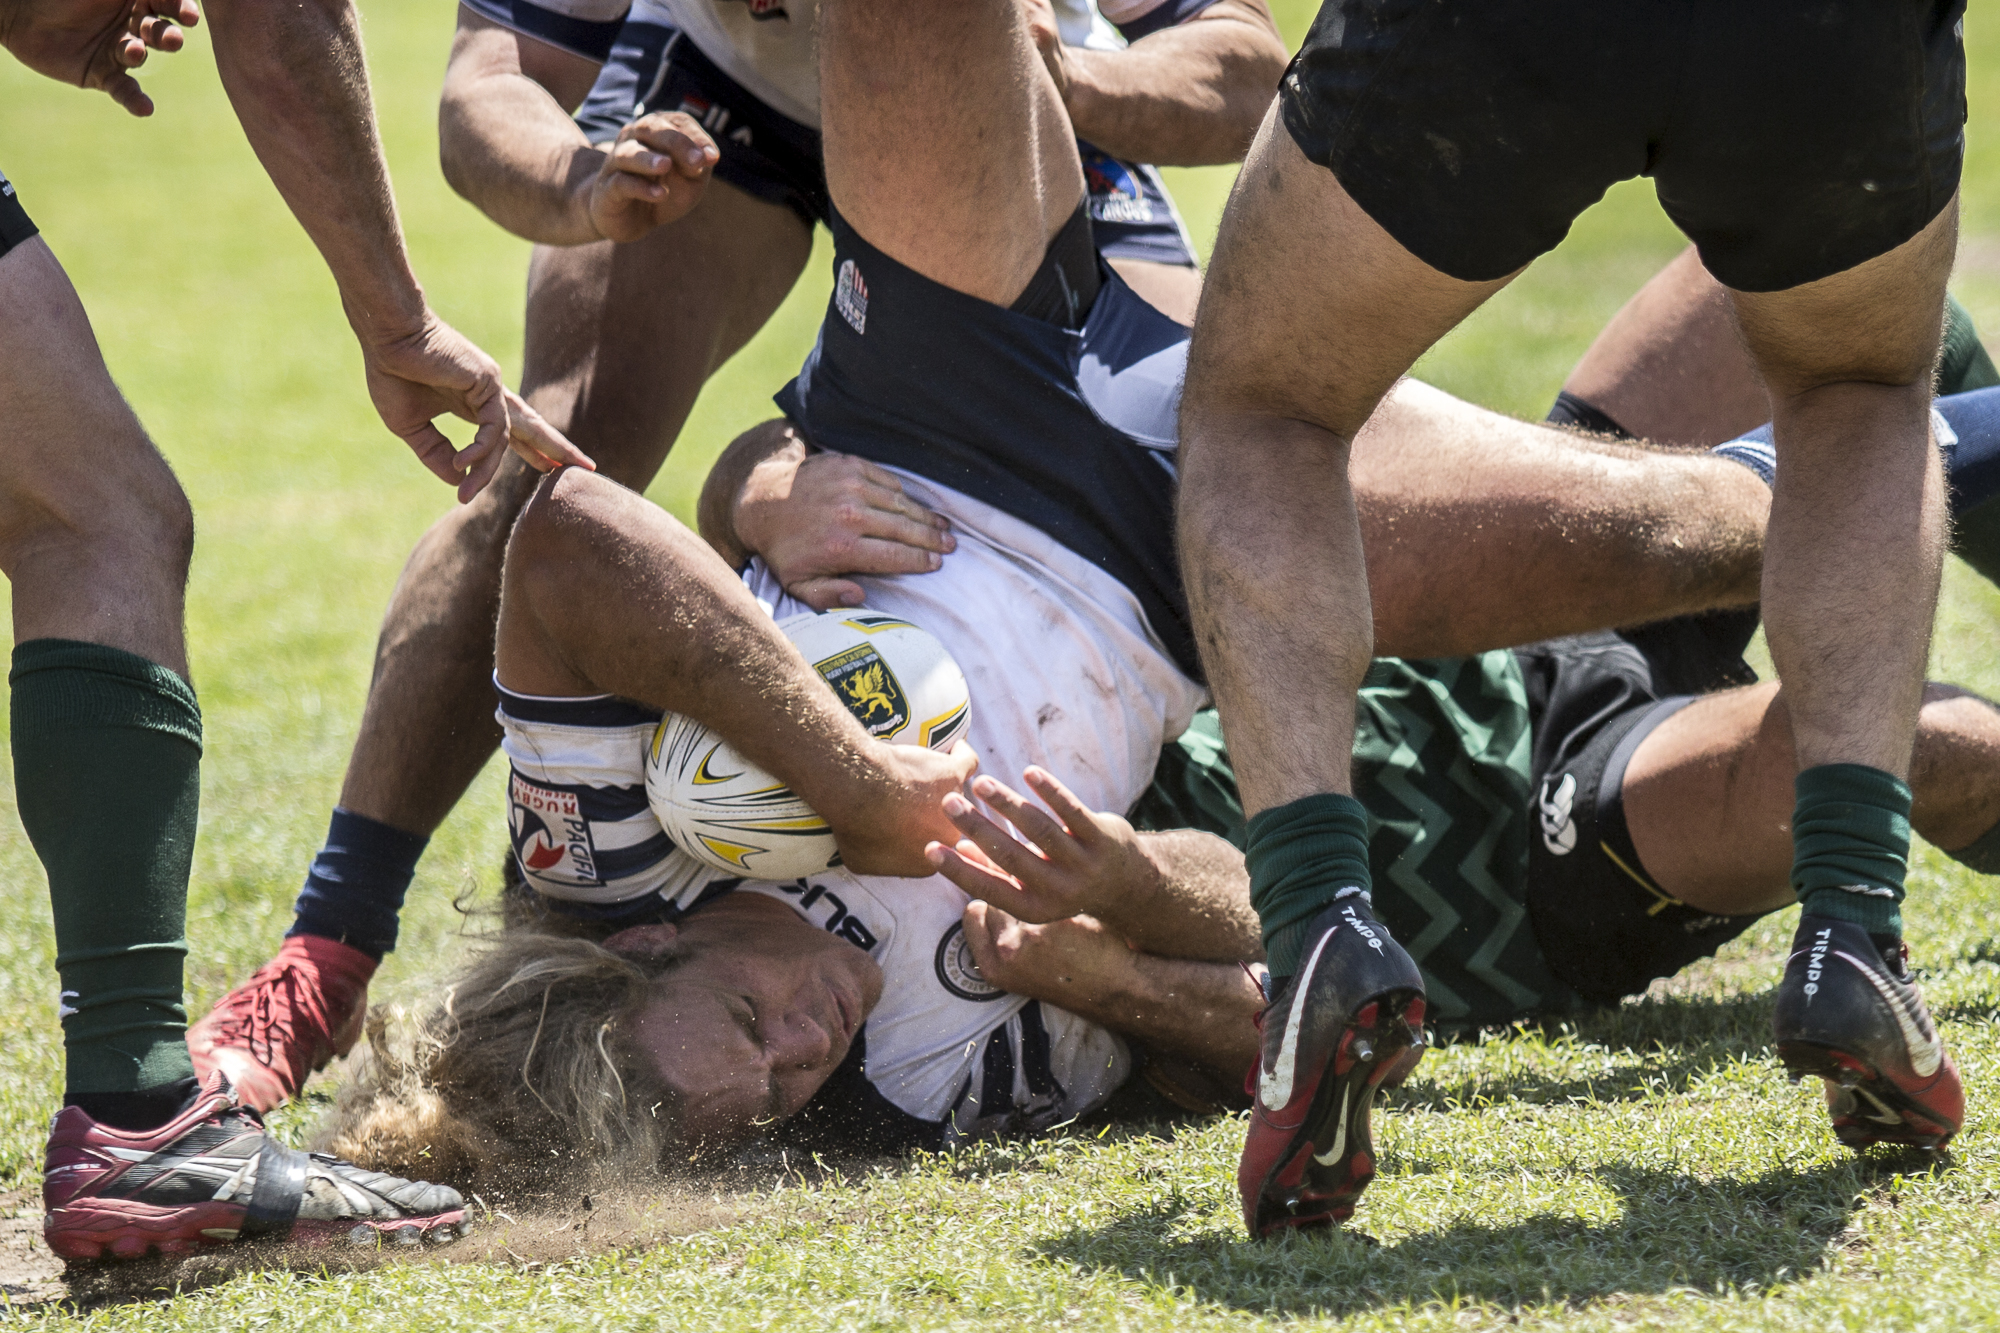  Old Mission Beach Athletic Club (OMBAC) rugby forward Shane Moise is tackled hard near the try line by the Santa Monica Dolphin defense Santa Monica Dolphins at Westchester High School field in Westchester California on Saturday April 28 2018. The S